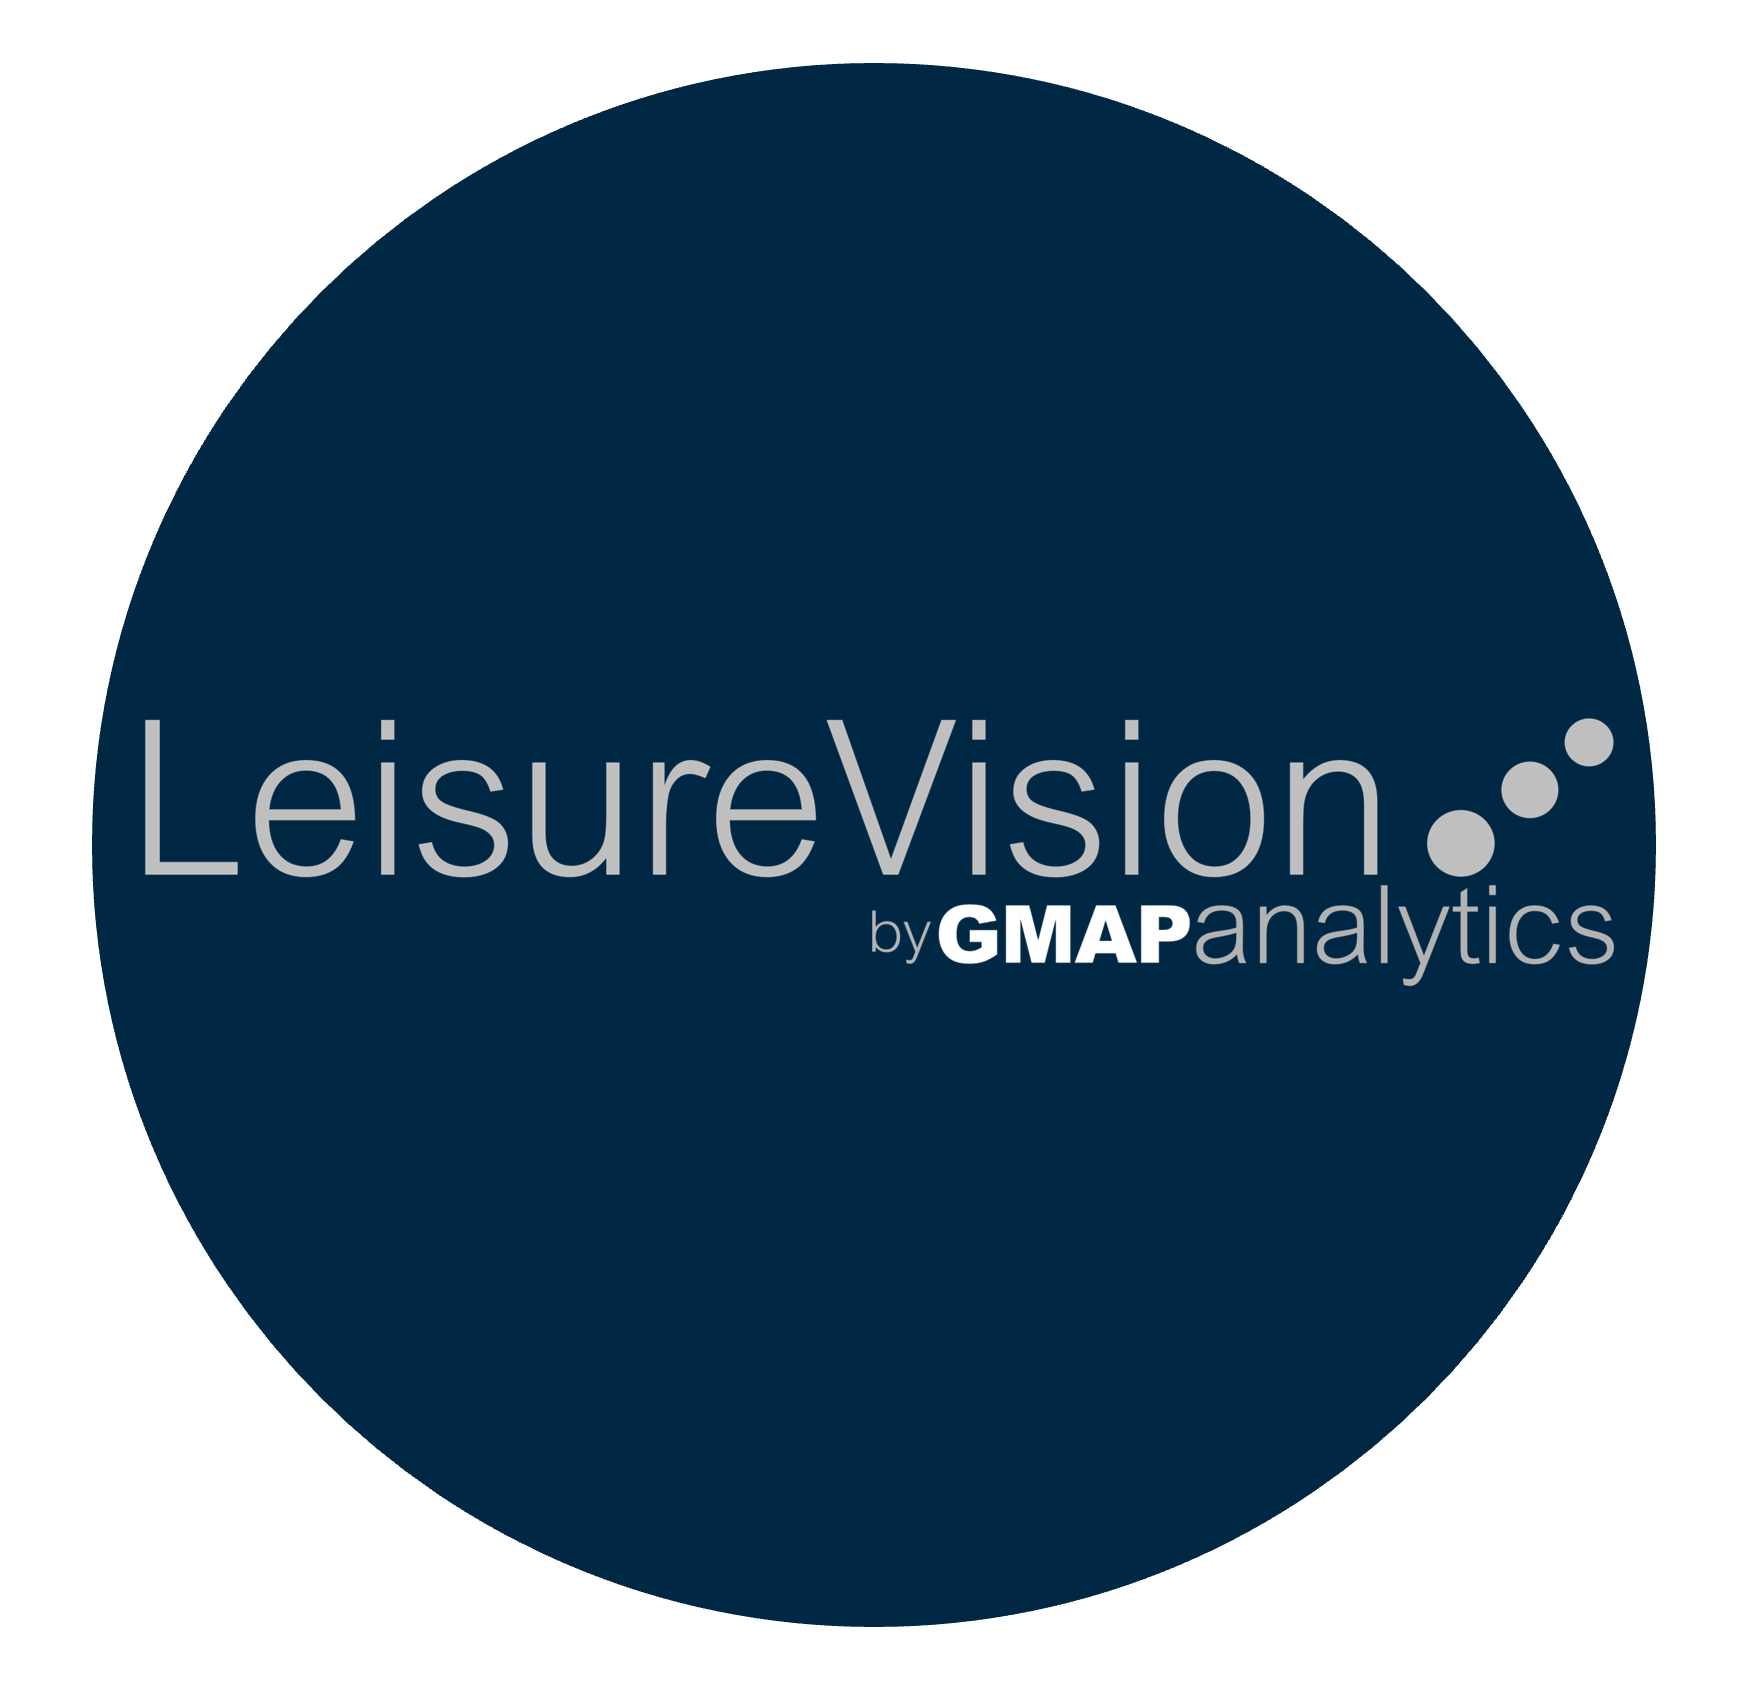 Location intelligence data for the leisure market